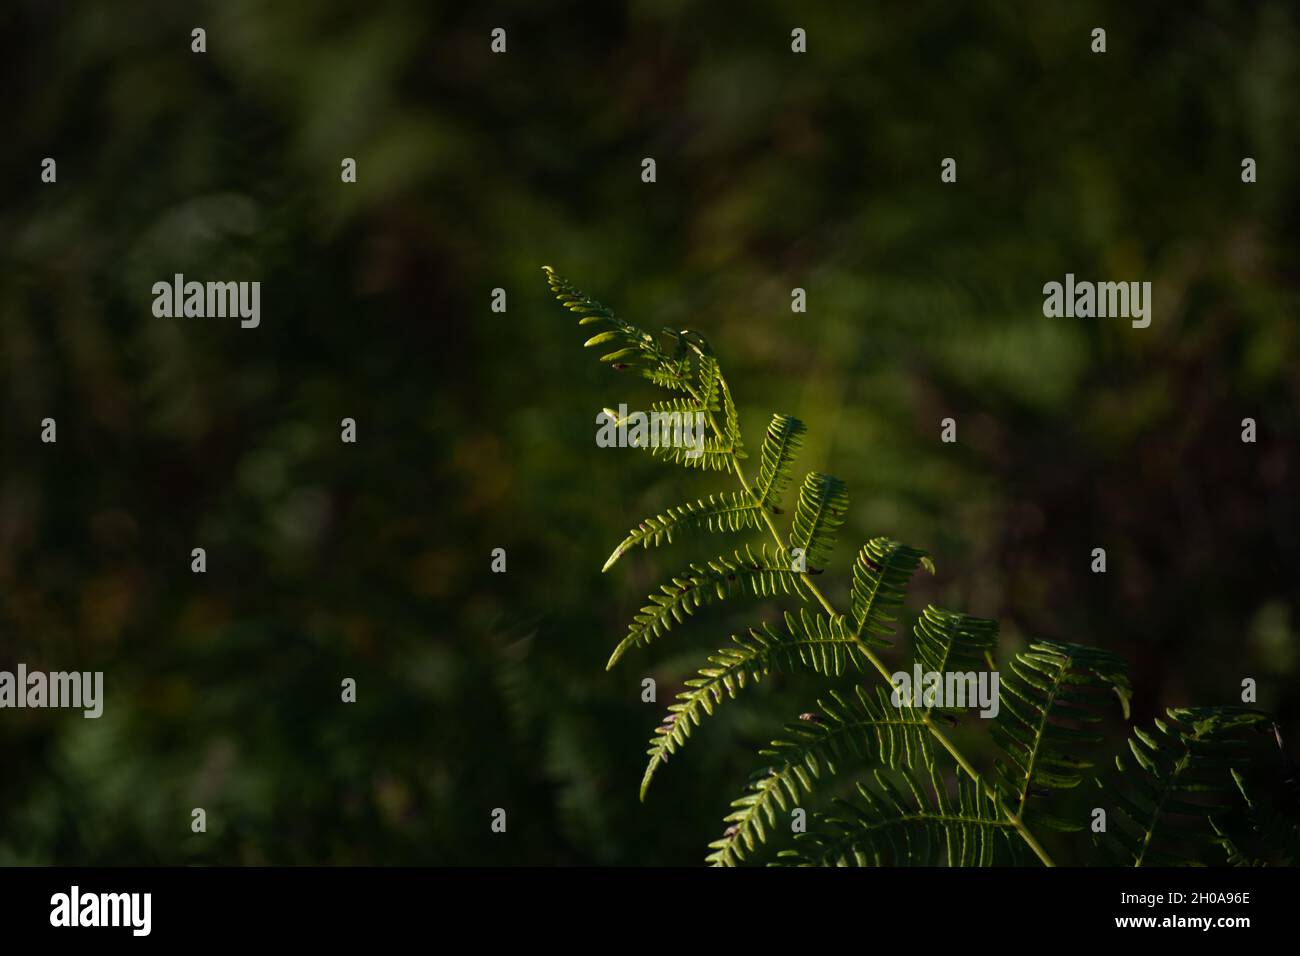 Backlit common bracken or eagle fern branch with leaves isolated on dark background Stock Photo